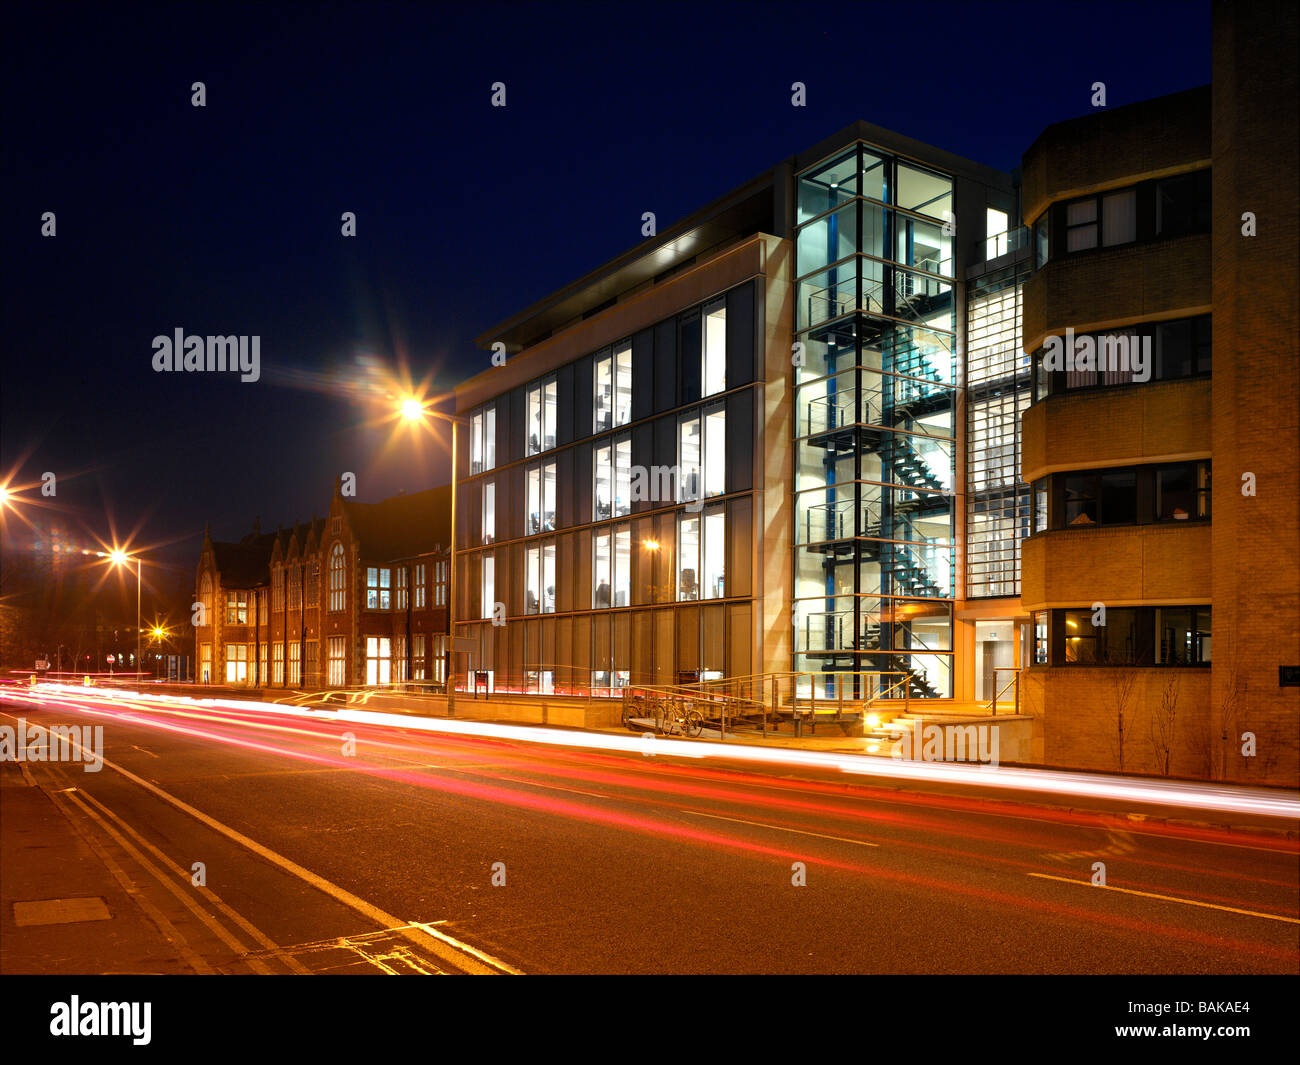 Information Engineering Laboratories, Oxford, United Kingdom, Rmjm, Information engineering laboratories nighttime view of whole Stock Photo